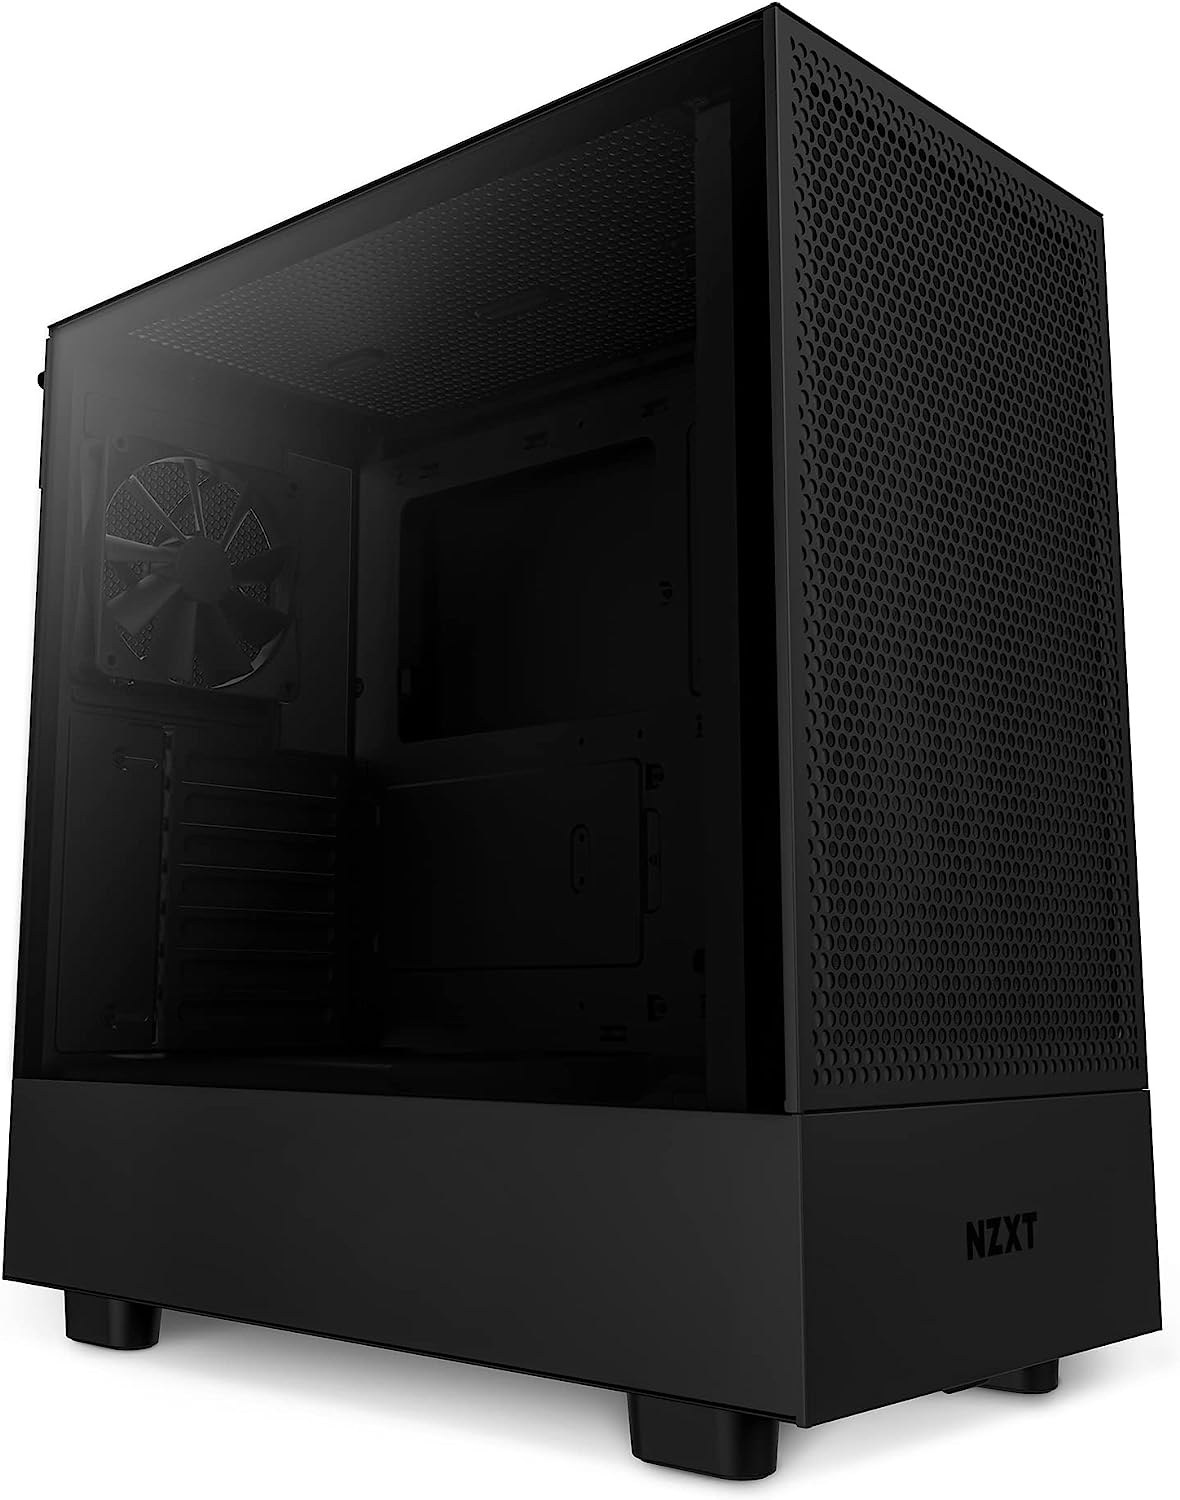 NZXT H5 Flow Compact ATX Mid-Tower PC Case in Black - High airflow design with tempered glass side panel. 0810074842419